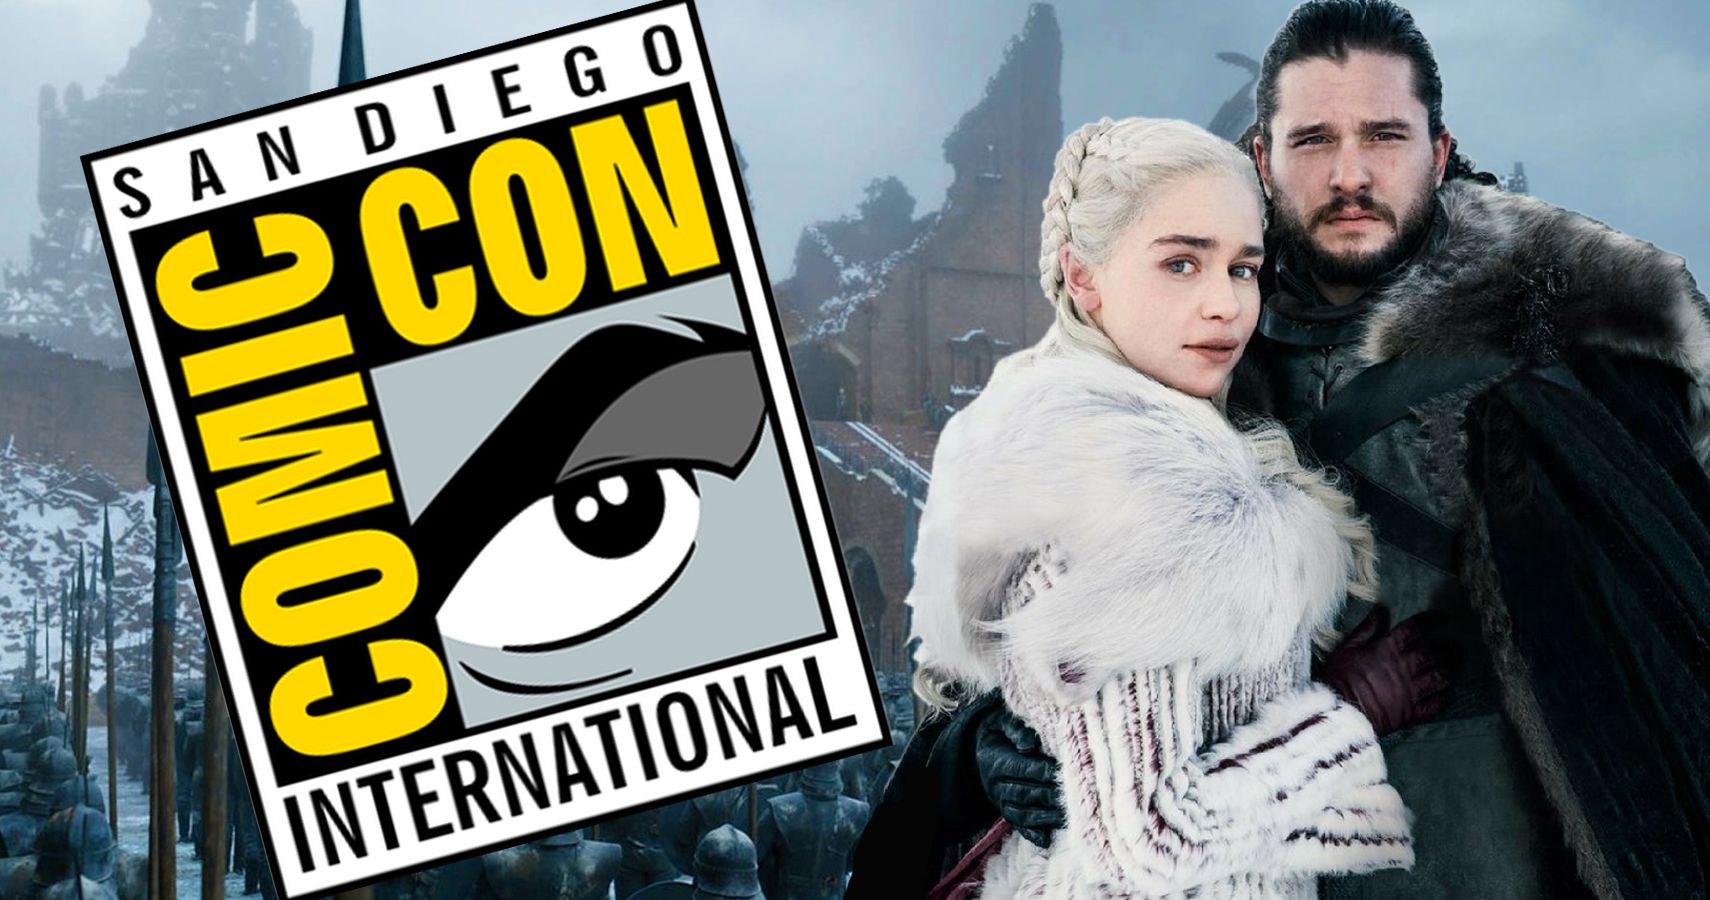 Game Of Thrones SDCC Panel Conveniently Ends Before Fan Questions